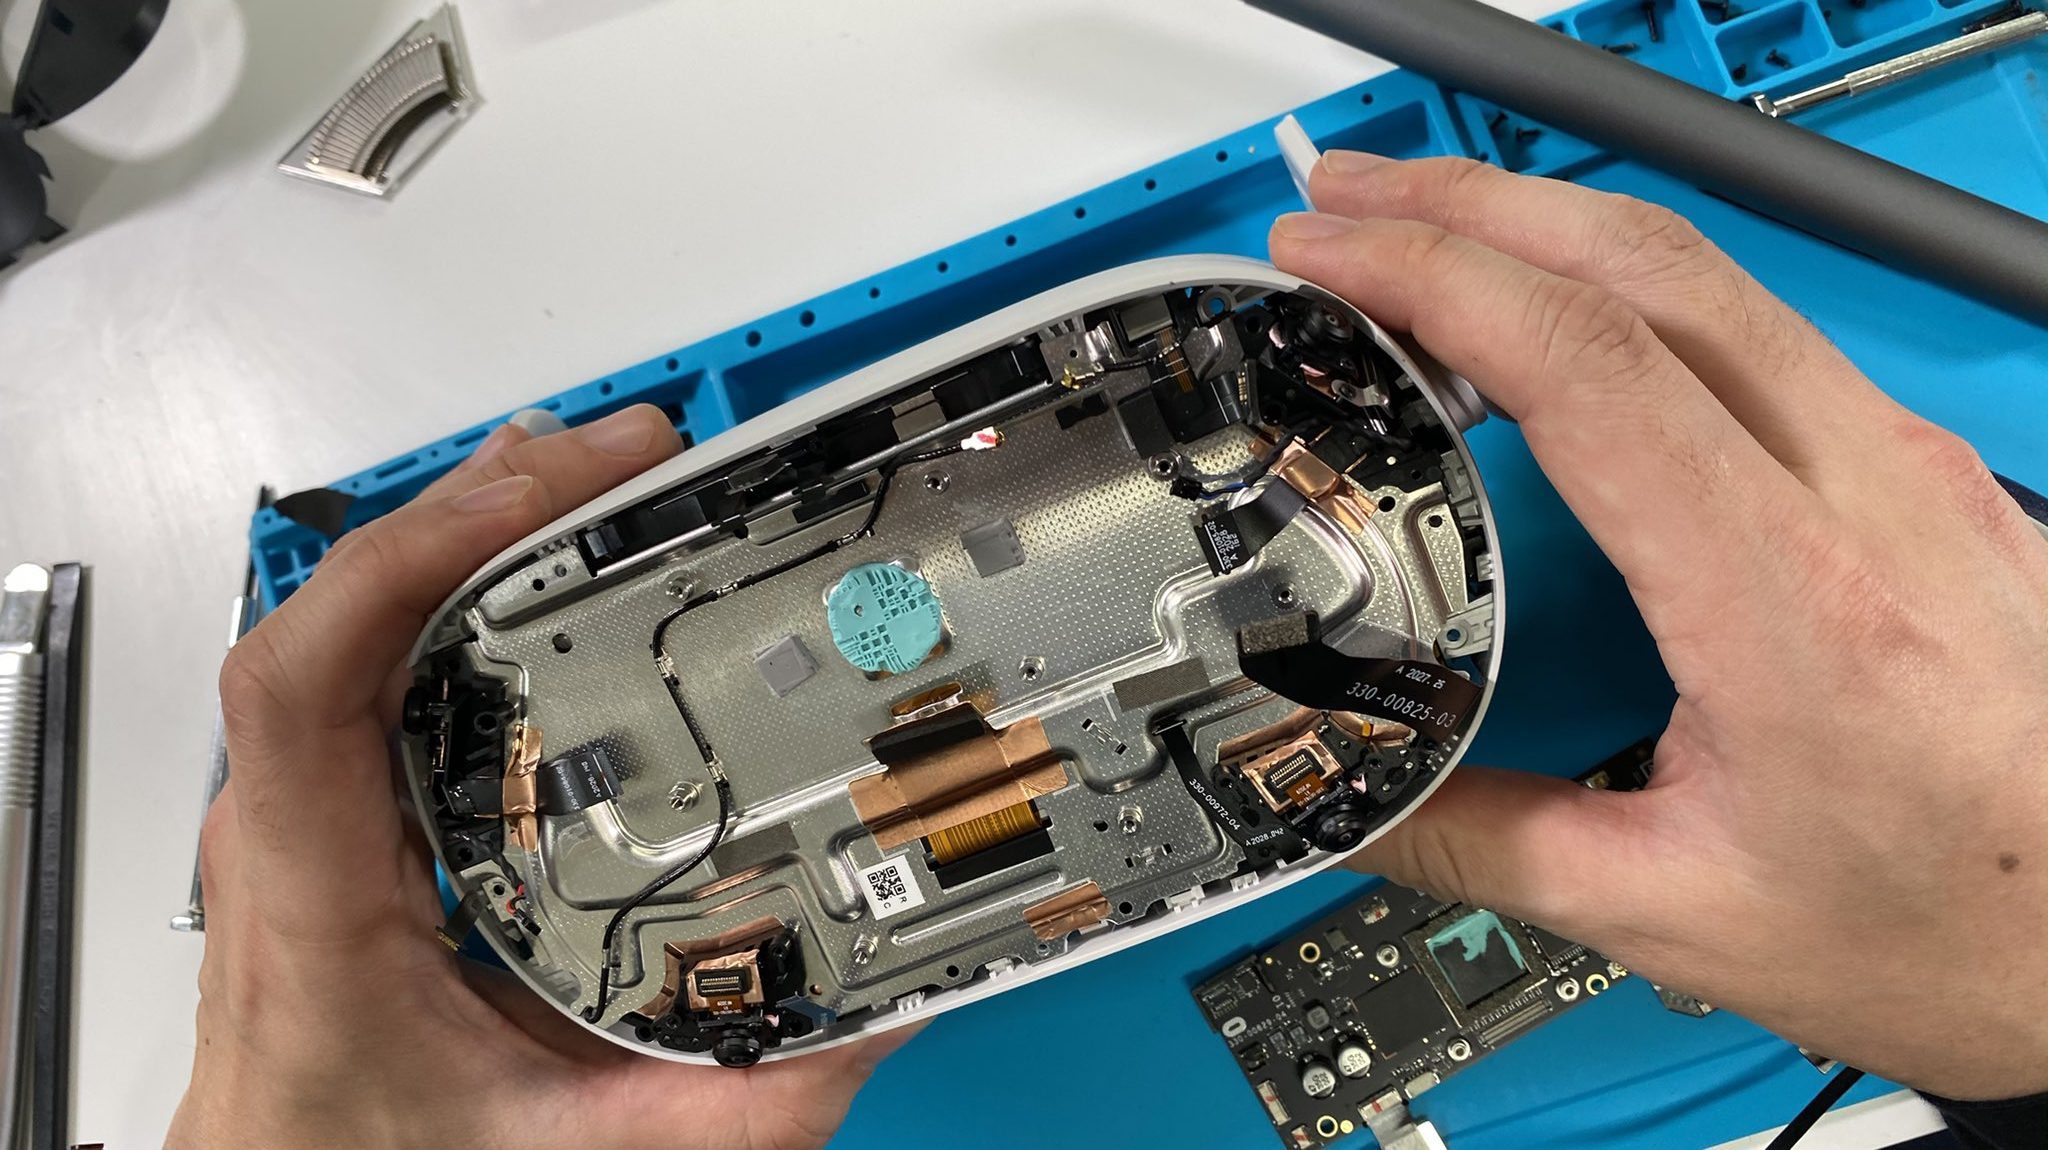 Oculus Quest Teardown And Disassembly Photos – Road To VR | vlr.eng.br